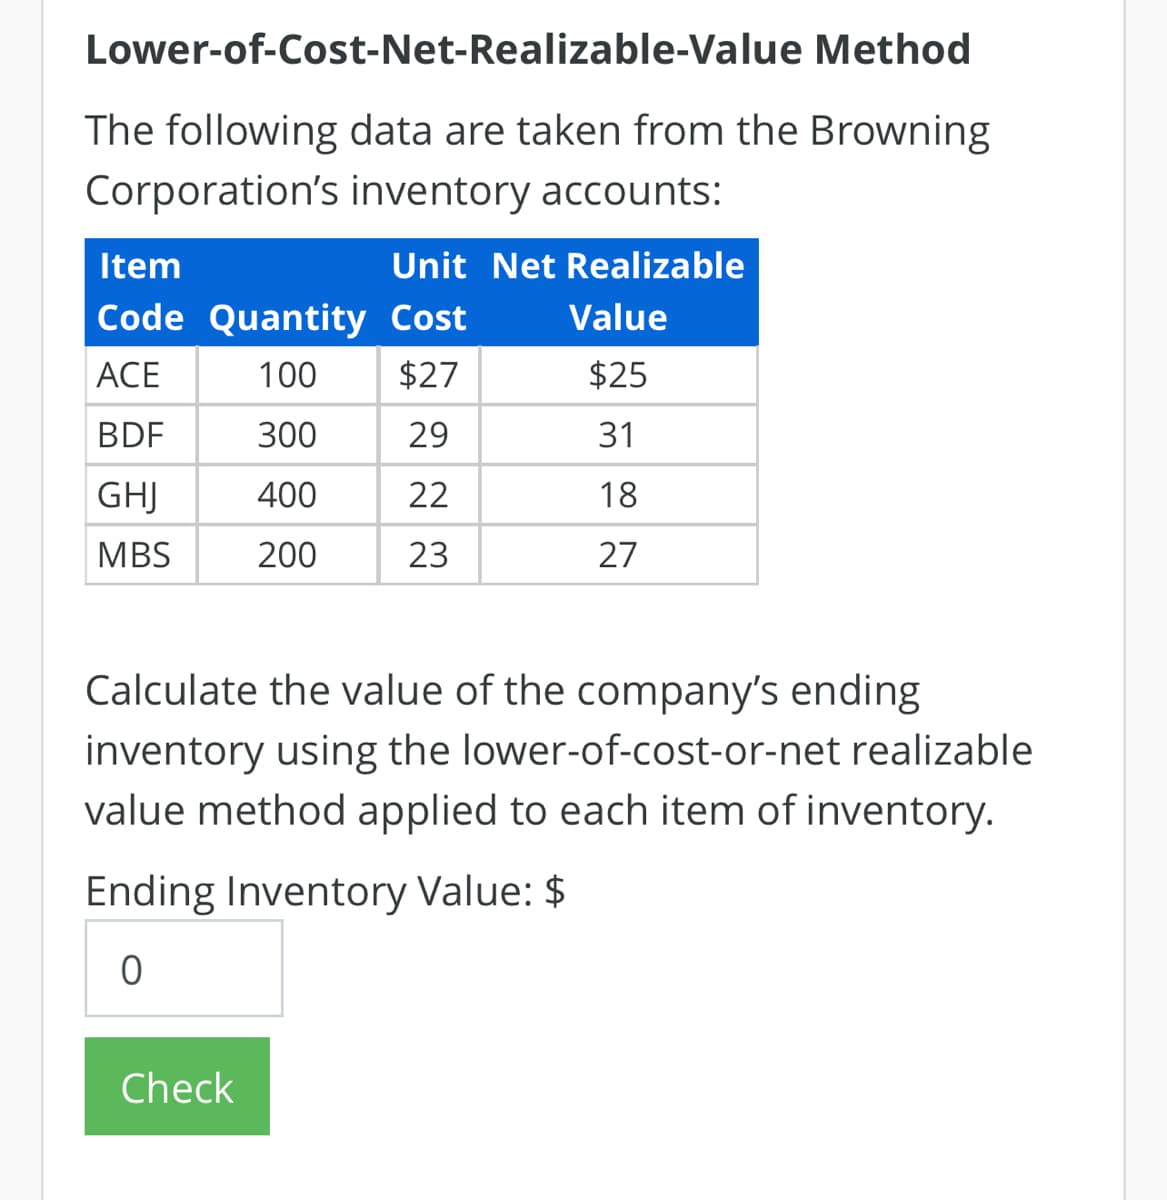 Lower-of-Cost-Net-Realizable-Value Method
The following data are taken from the Browning
Corporation's inventory accounts:
Item
Code Quantity Cost
ACE
100
$27
BDF
300
29
GHJ
400
22
MBS
200
23
Unit Net Realizable
Check
Value
$25
31
18
27
Calculate the value of the company's ending
inventory using the lower-of-cost-or-net realizable
value method applied to each item of inventory.
Ending Inventory Value: $
0